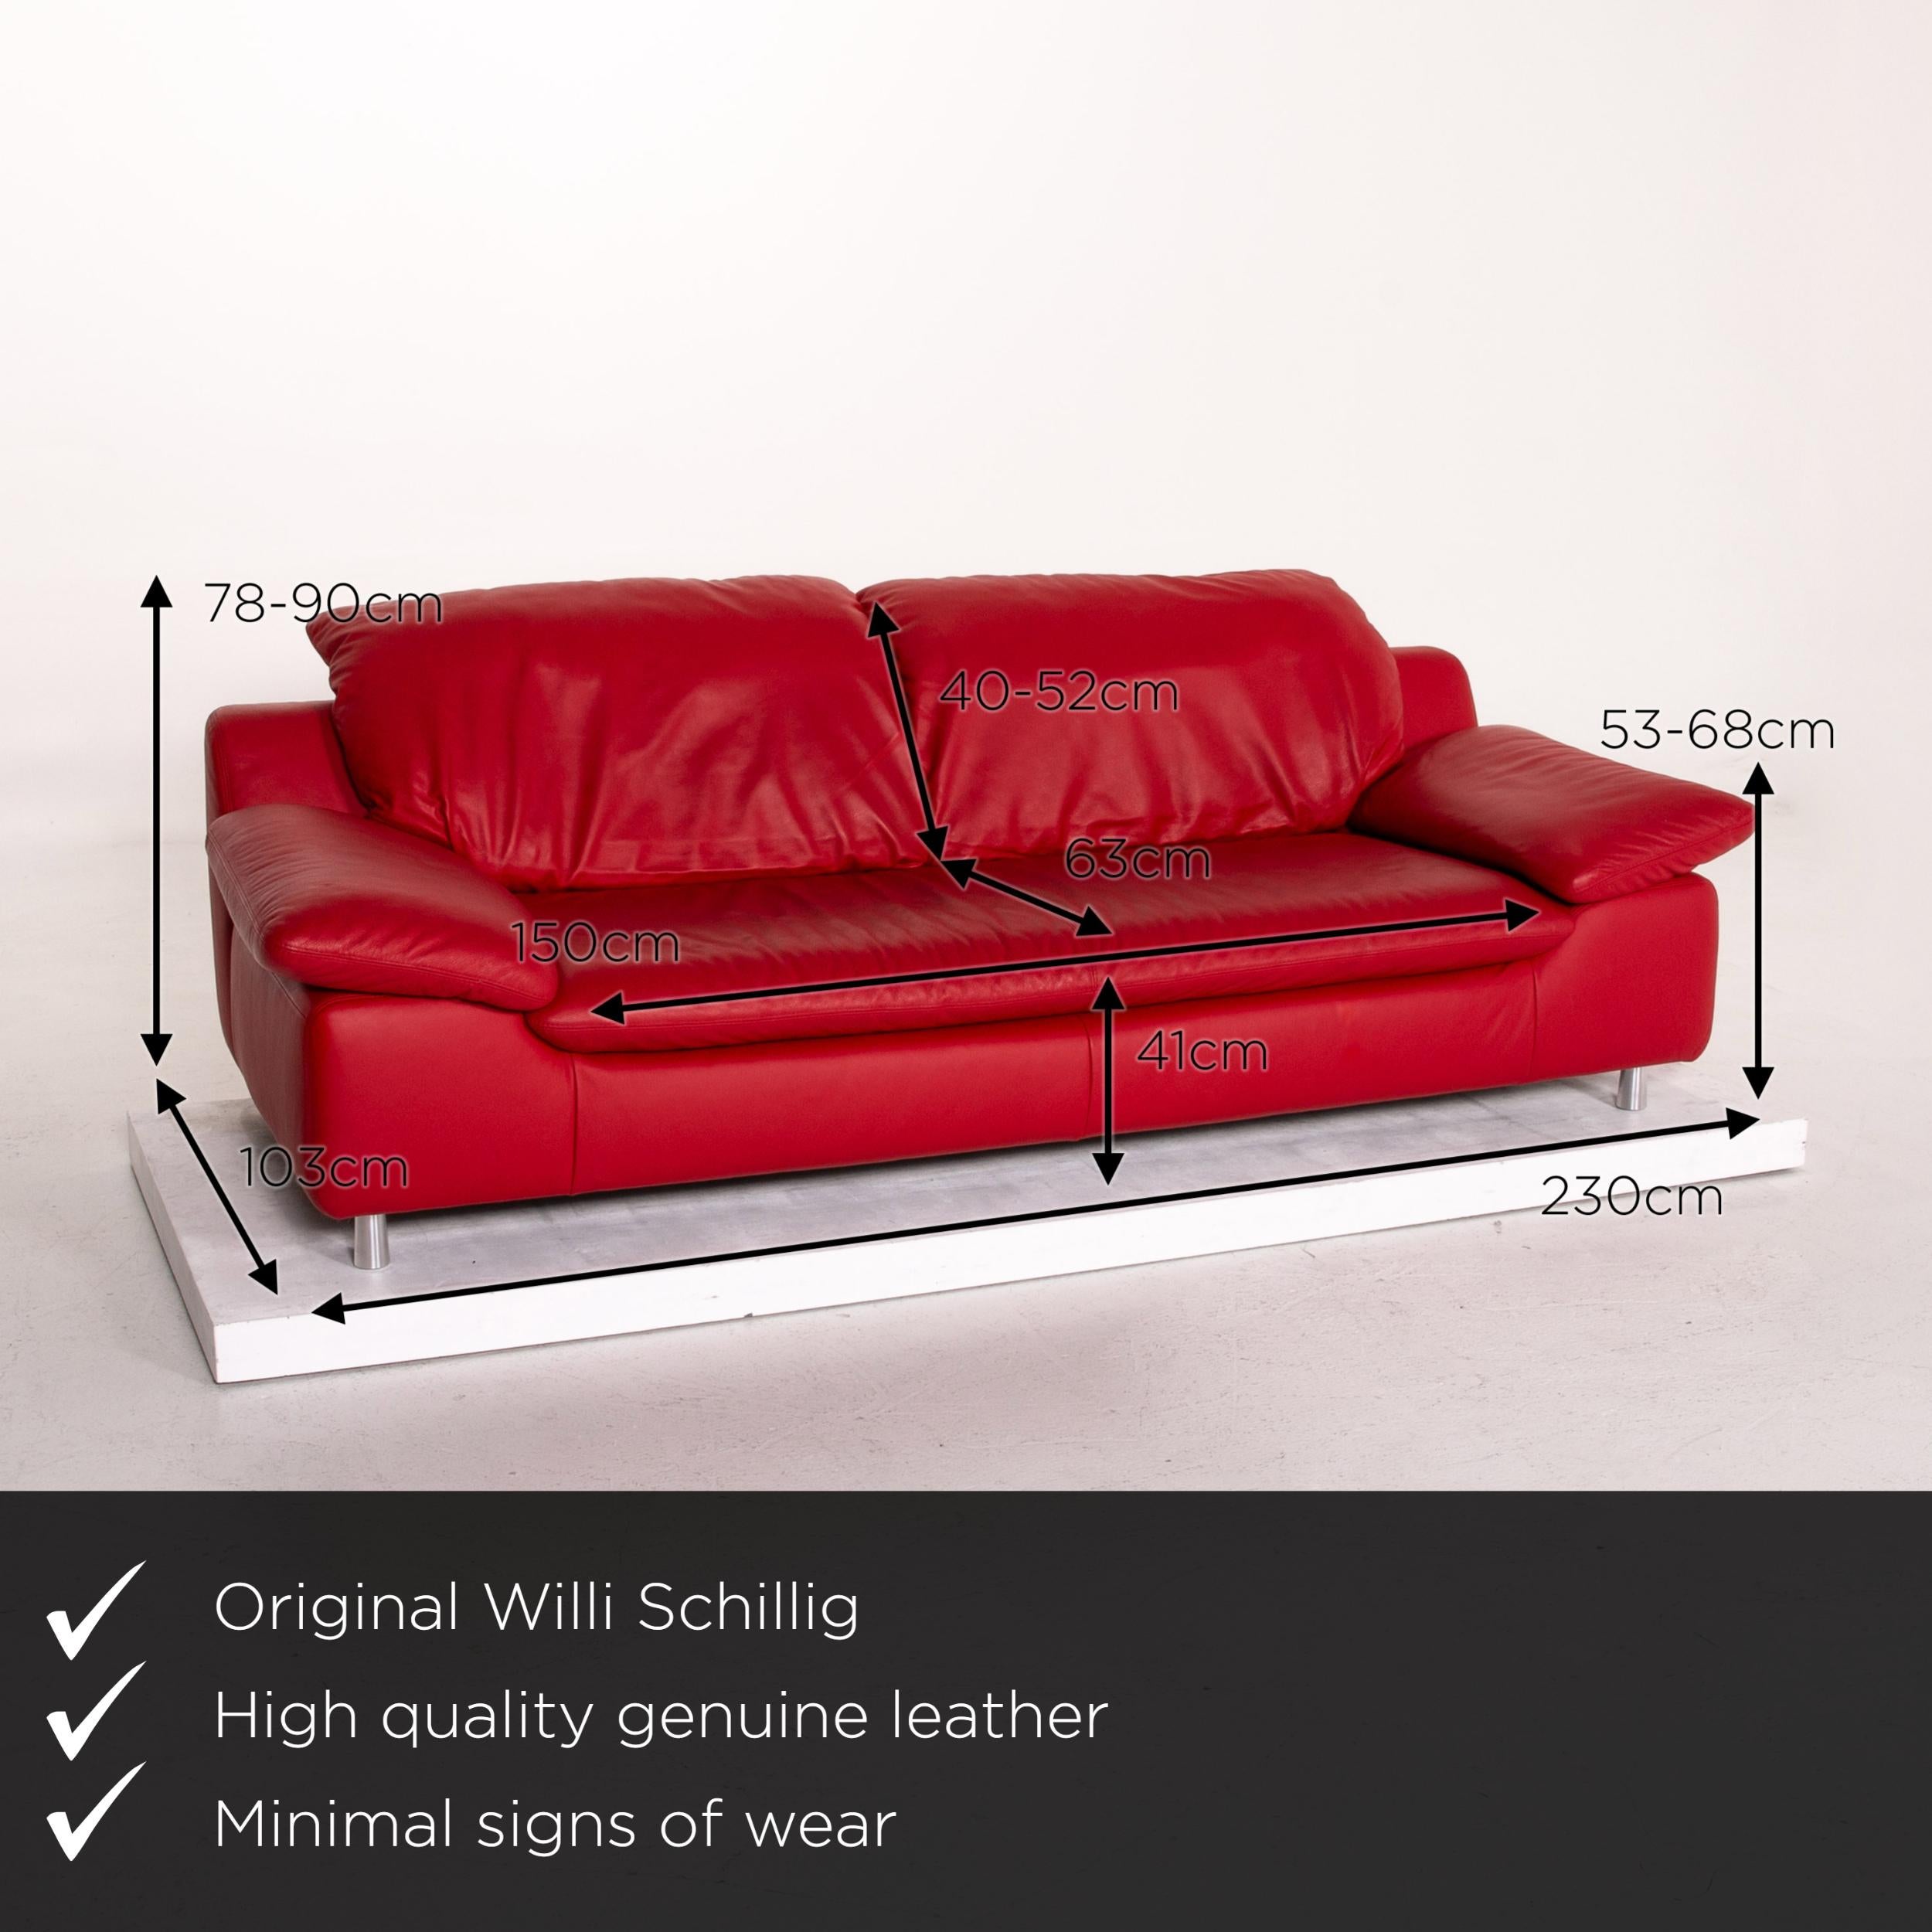 We present to you a Willi Schillig leather sofa red three-seat function couch.
 
 

 Product measurements in centimeters:
 

Depth 103
Width 230
Height 78
Seat height 41
Rest height 53
Seat depth 63
Seat width 150
Back height 40.